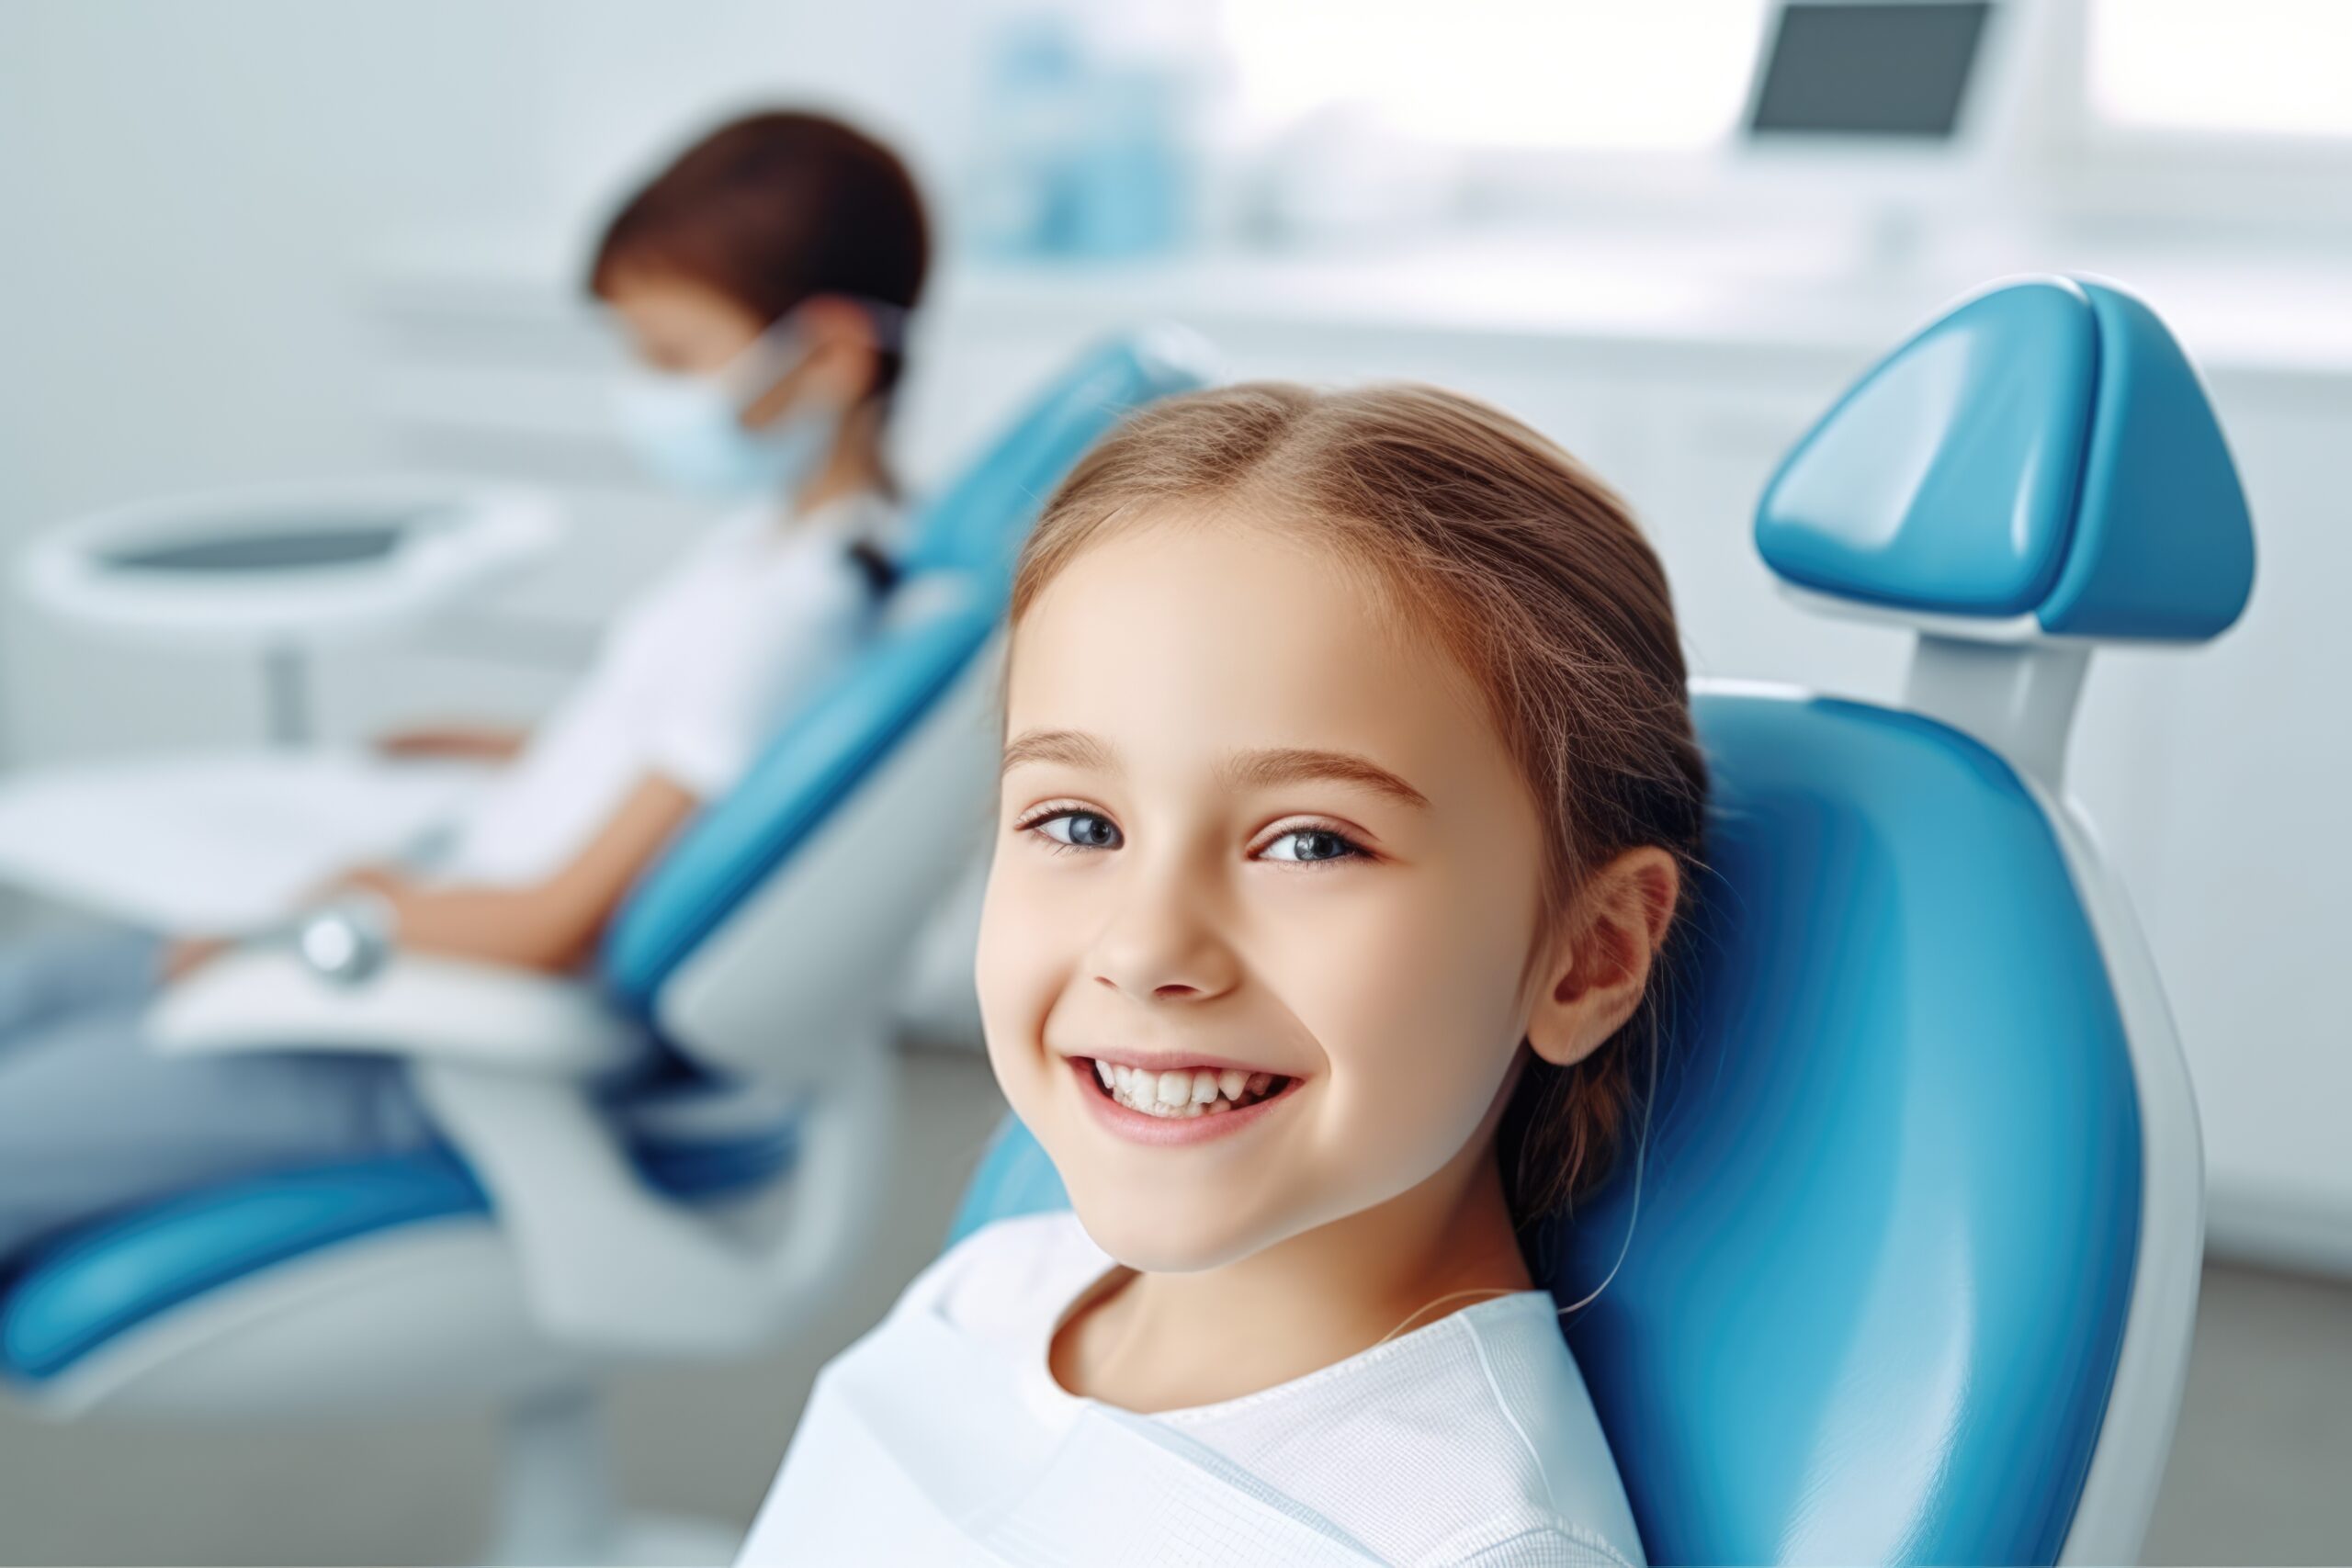 little girl at a Children's dentistry for healthy teeth and beautiful smile.